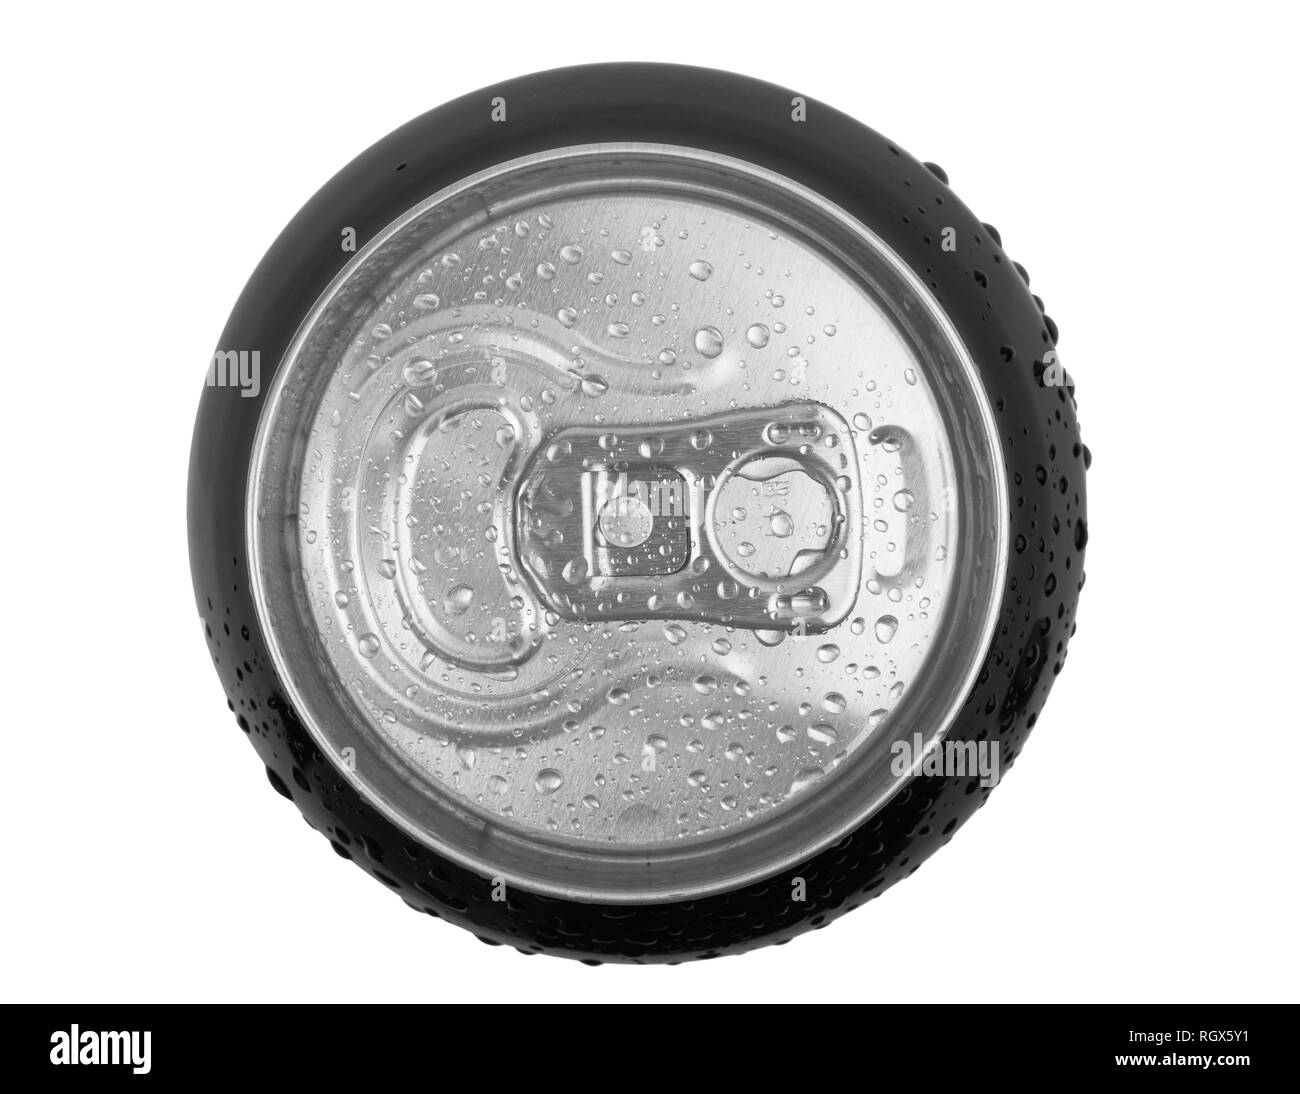 Top part of beer can close up view Stock Photo